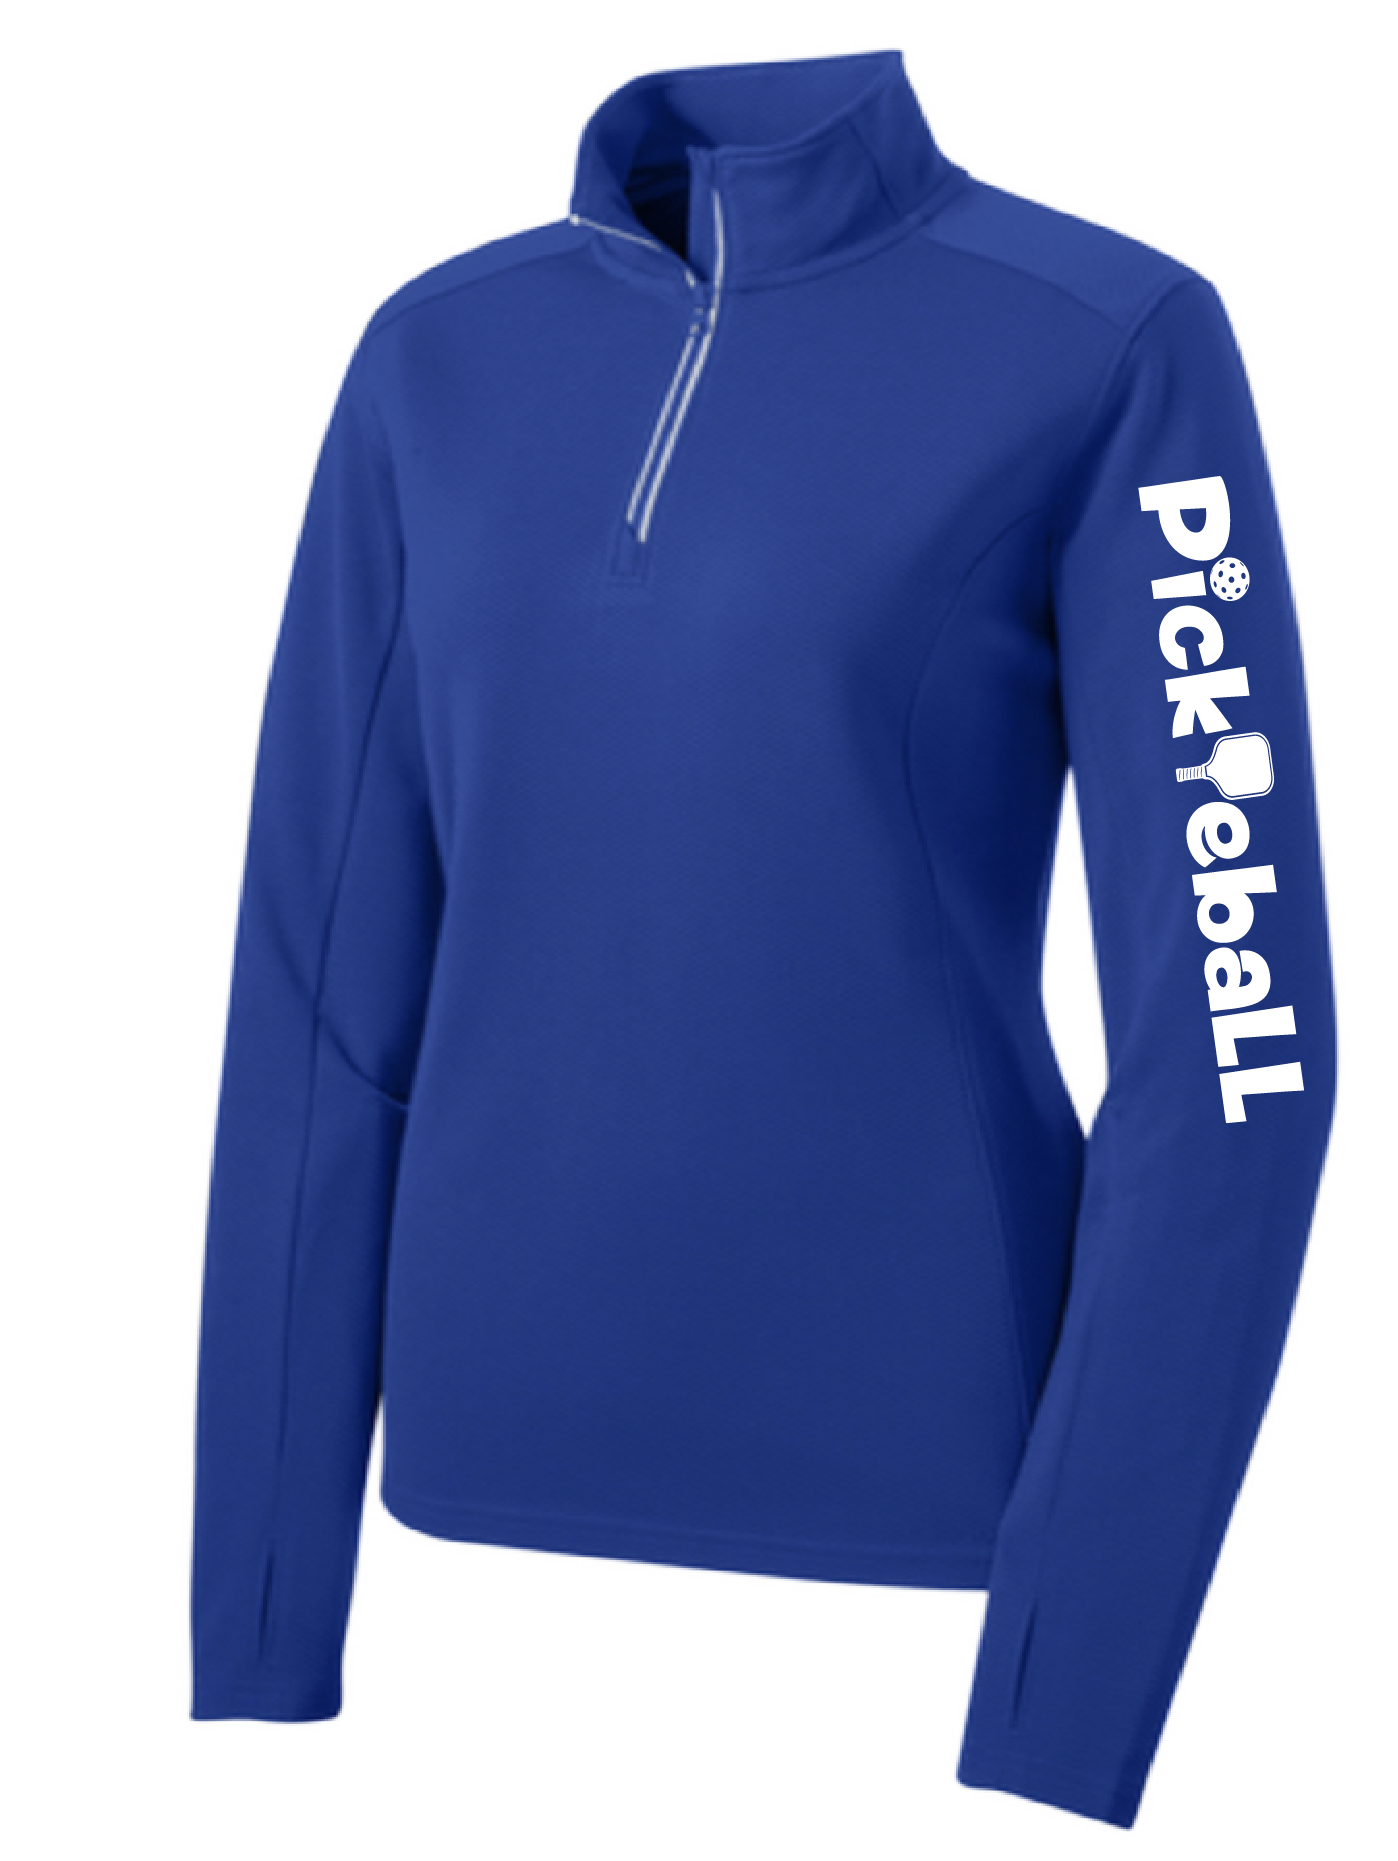 Pickleball Design: Pickleball Horizontal customizable location  Women's 1/4-Zip Pullover:  Princess seams and drop tail hem.  Turn up the volume in this Women's shirt with its perfect mix of softness and attitude. Material is ultra-comfortable with moisture wicking properties and tri-blend softness. PosiCharge technology locks in color. Highly breathable and lightweight. Versatile enough for wearing year-round.